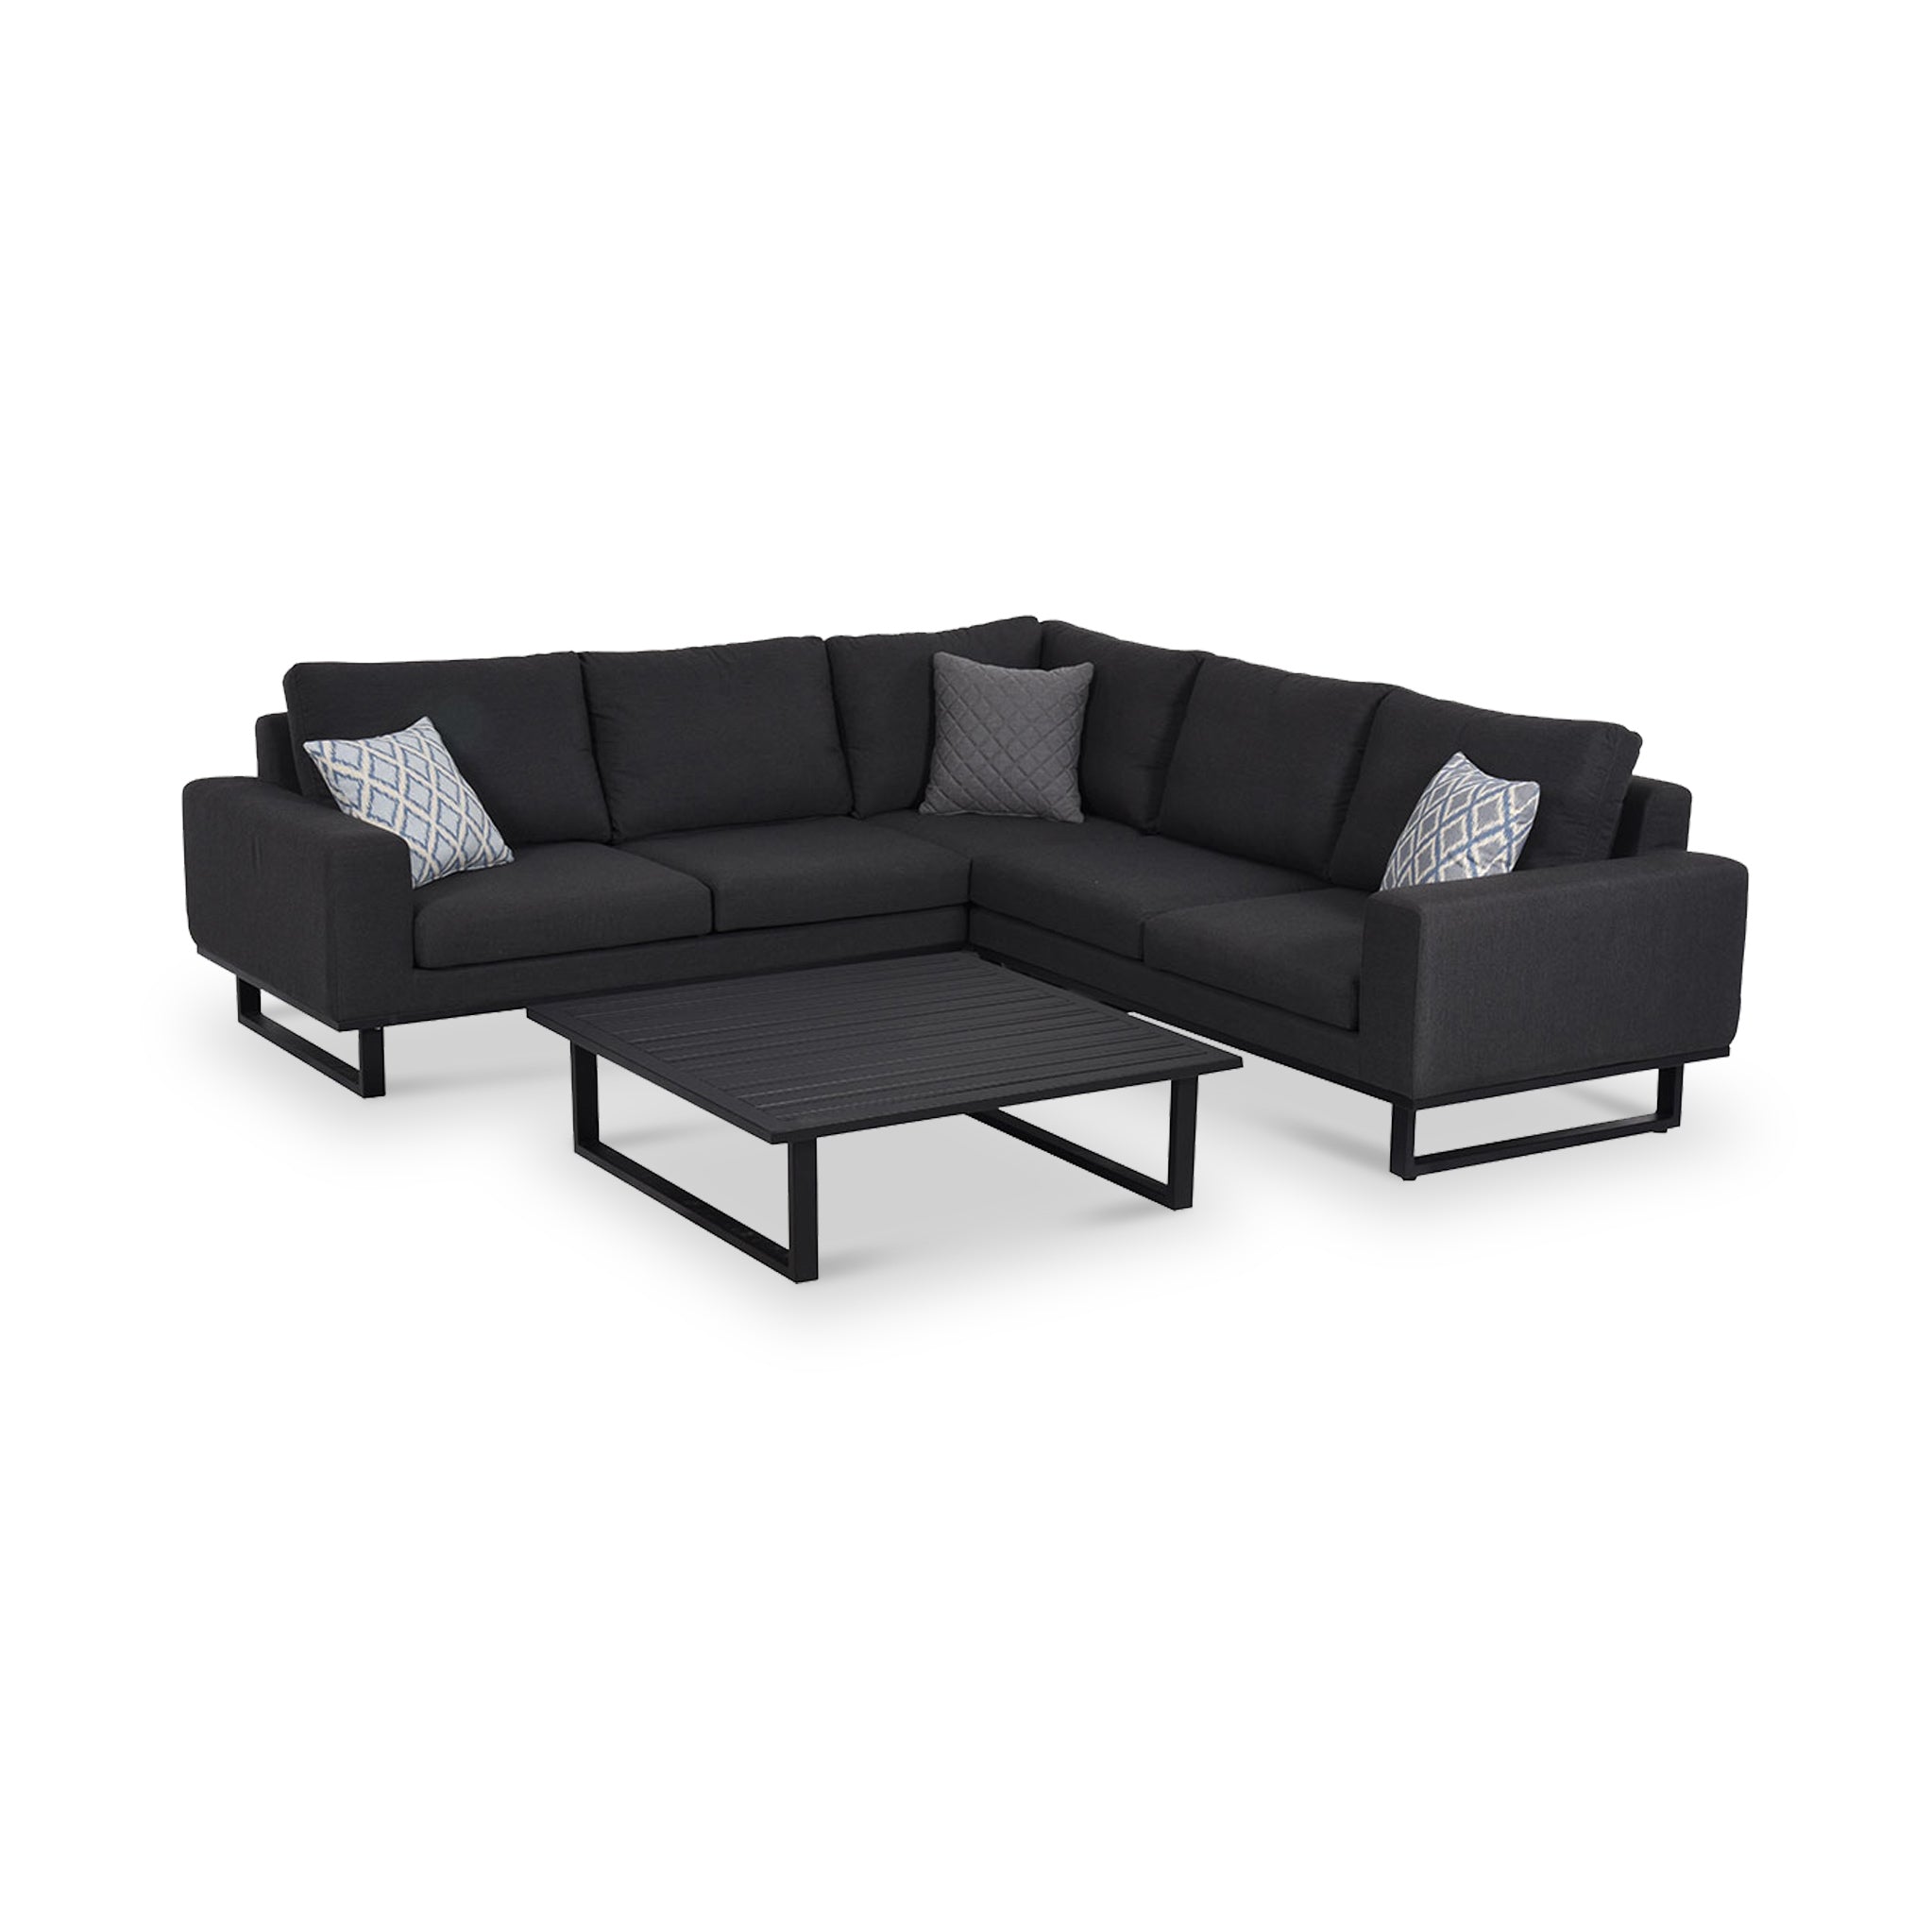 Maze Ethos Outdoor Corner Sofa Group With Coffee Table Roseland